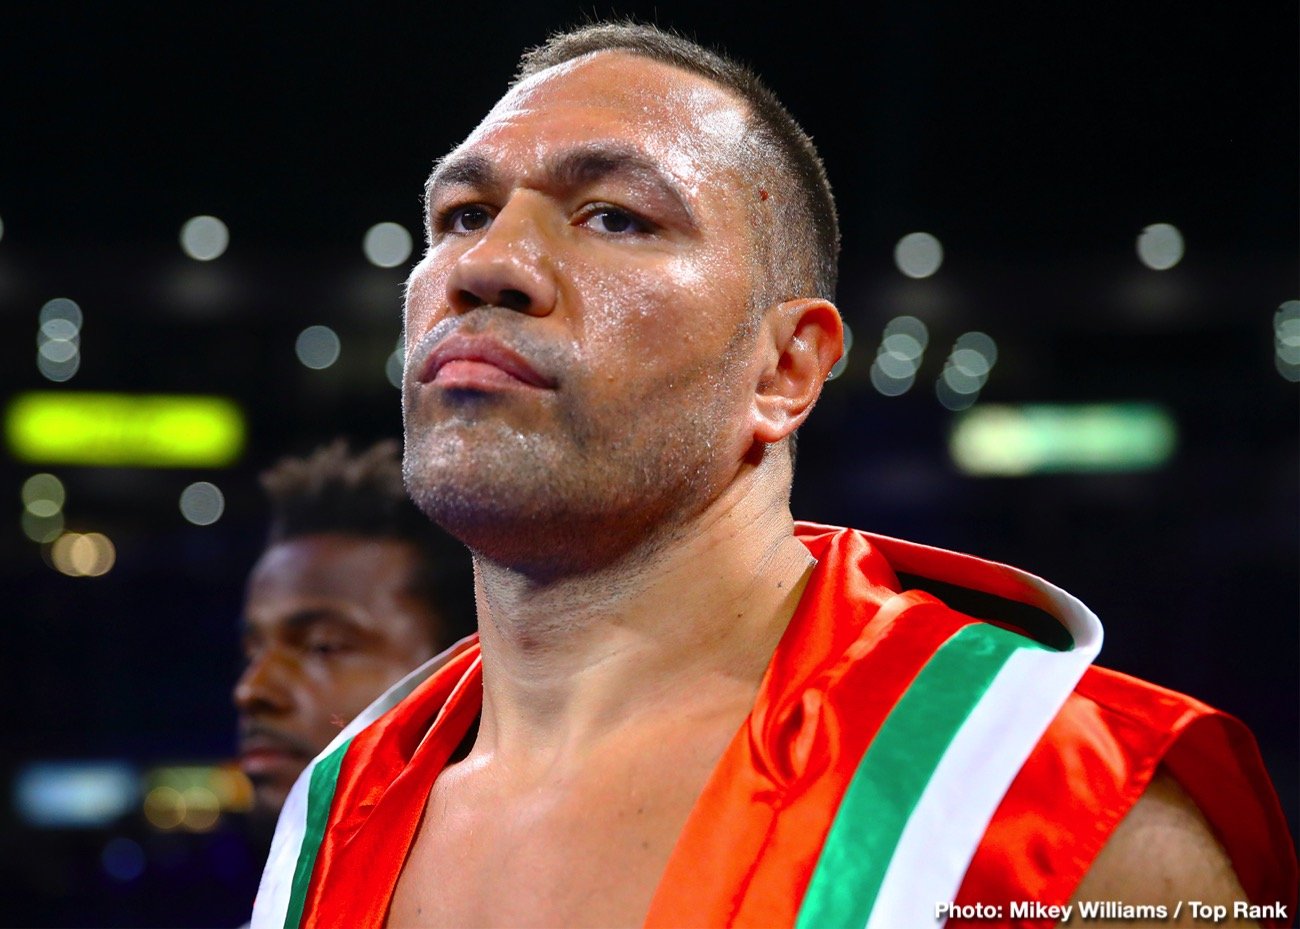 Image: Joshua vs. Pulev a done deal for 12/12 at the O2 in London, UK